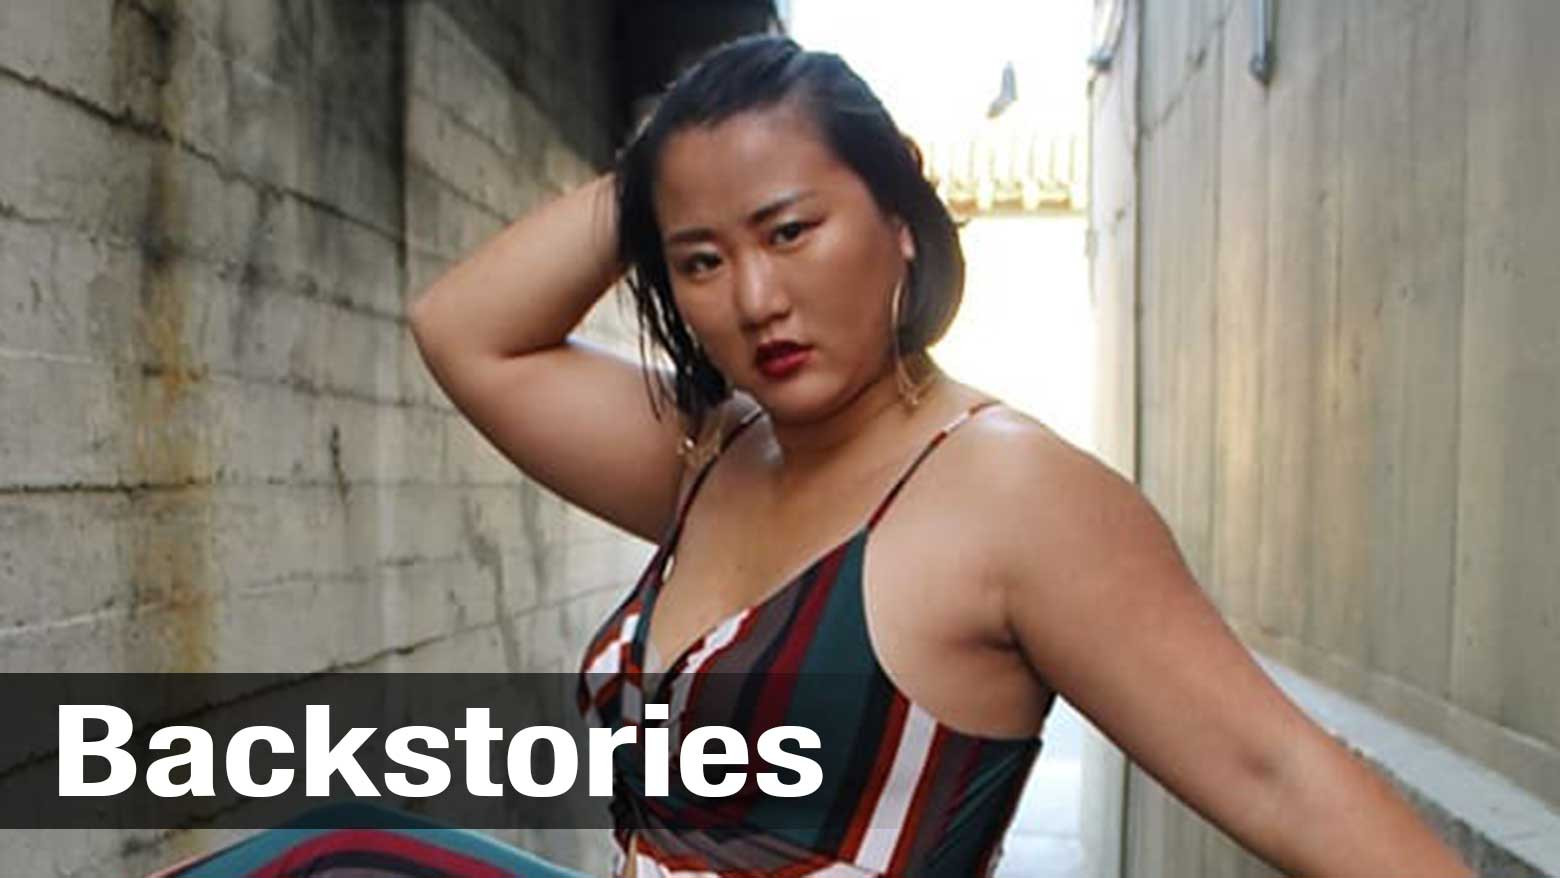 Plus-size model learns first-hand about race and diversity in the US